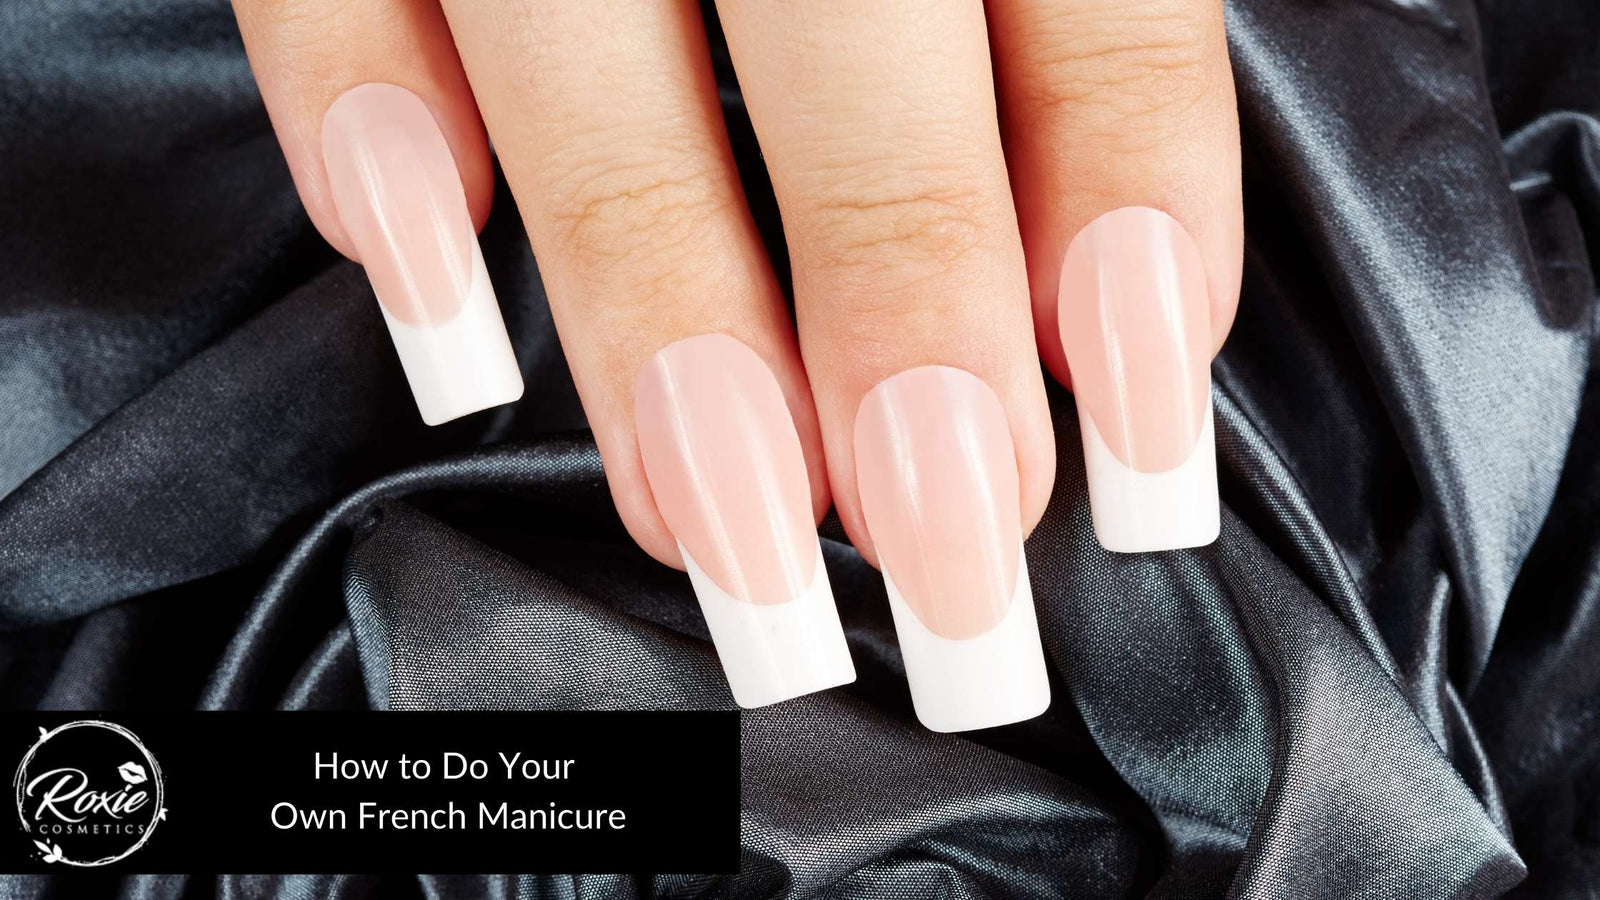 How to Do French Manicure